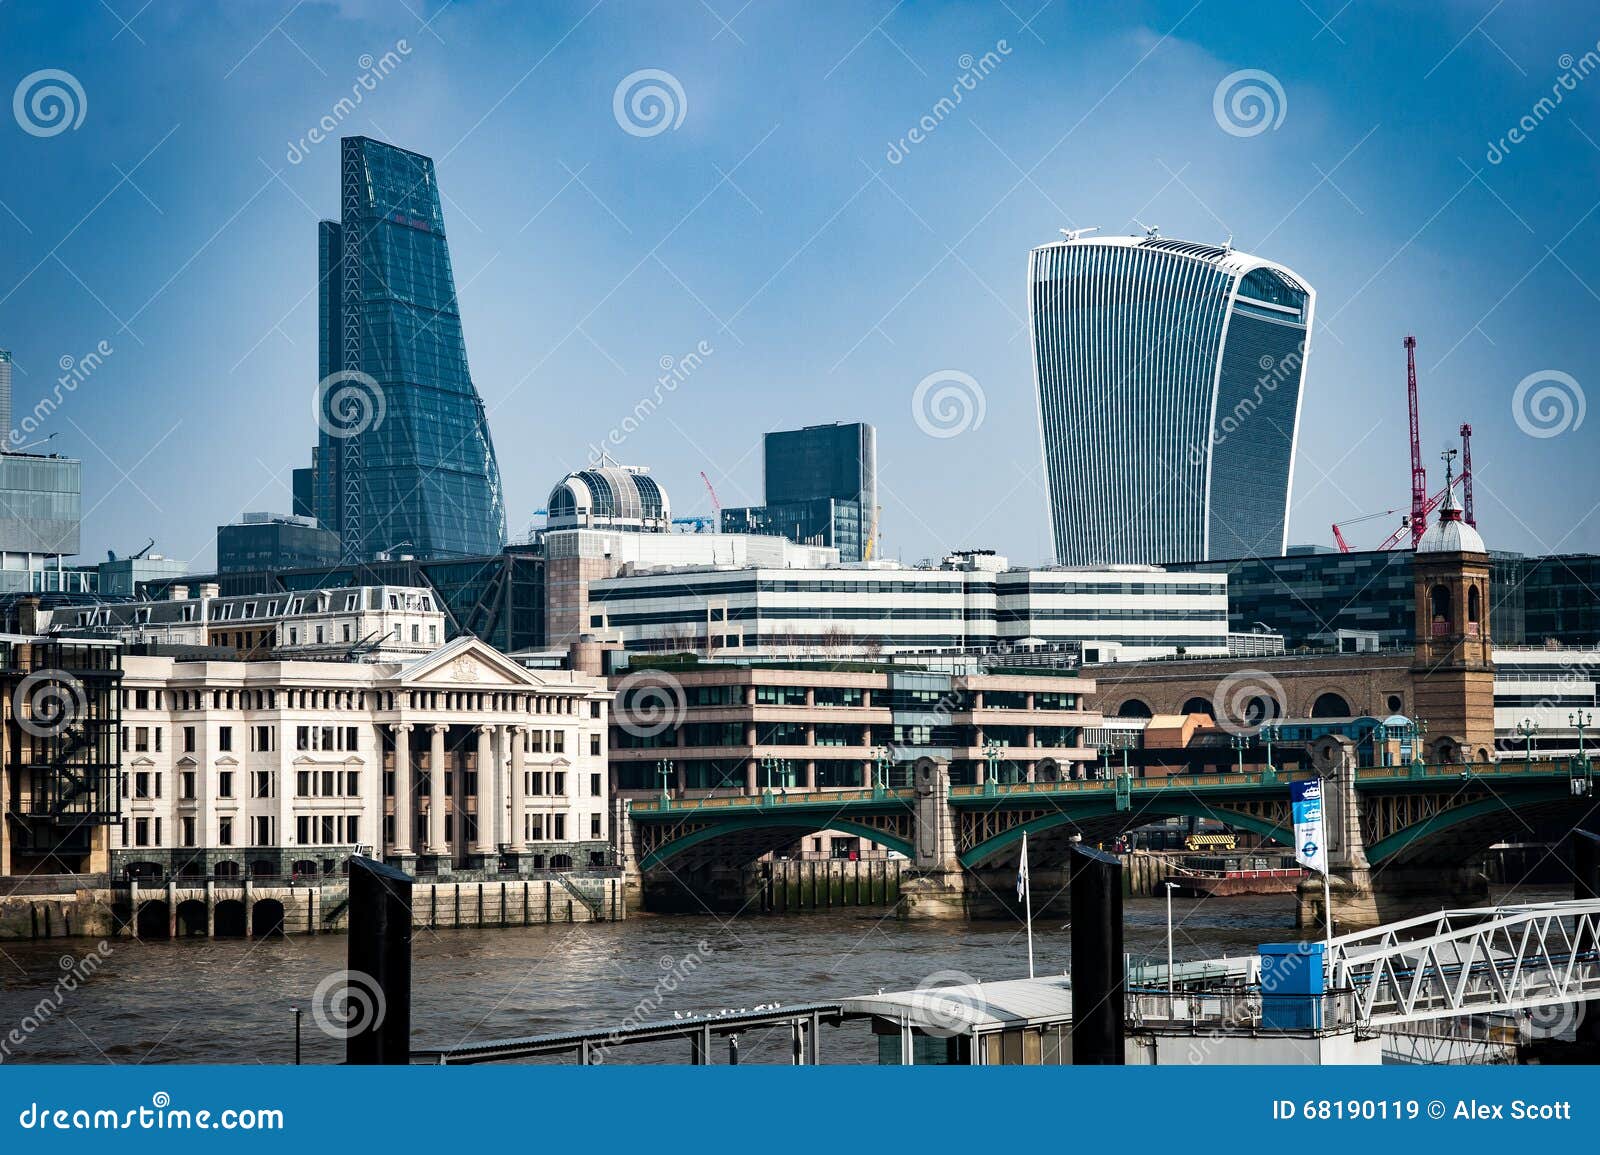 Old and new architecture stock image. Image of modern - 68190119